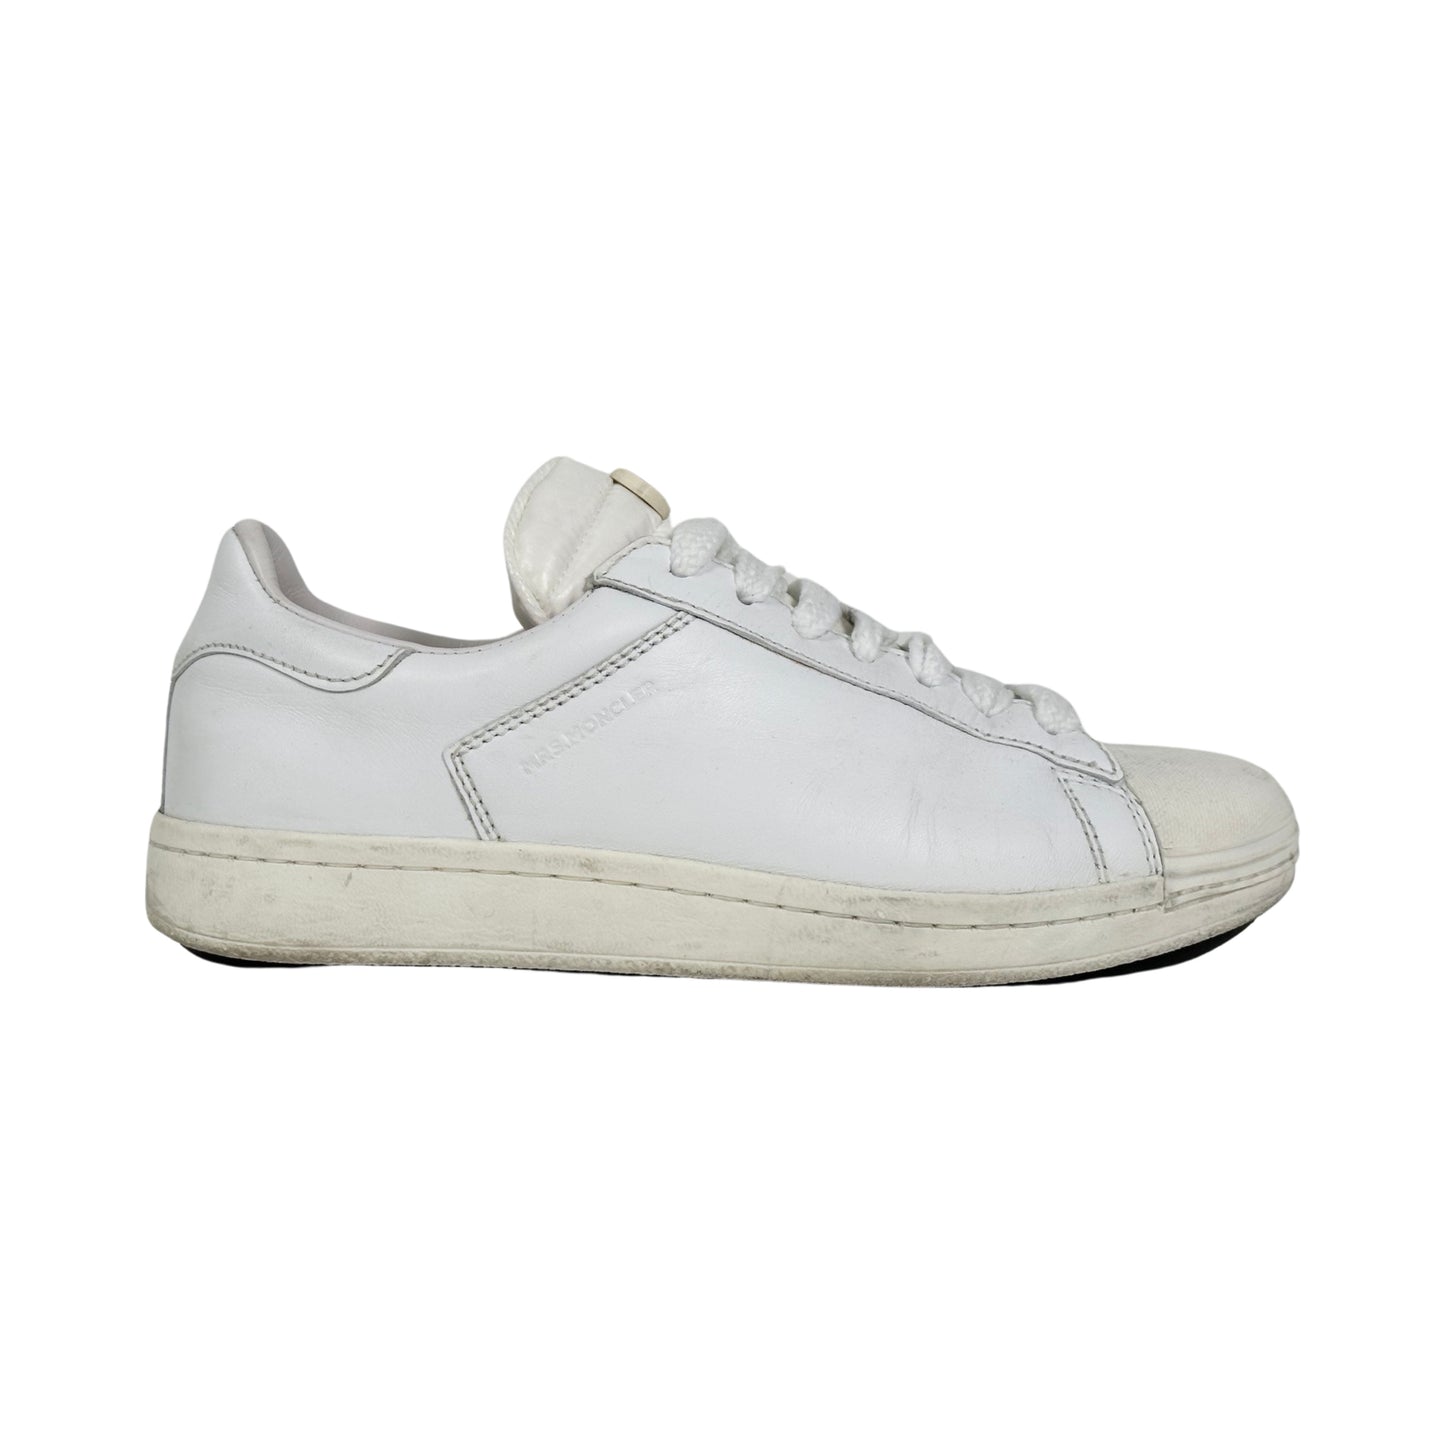 Moncler Angeline Leather Sneakers - Size 37 EUR